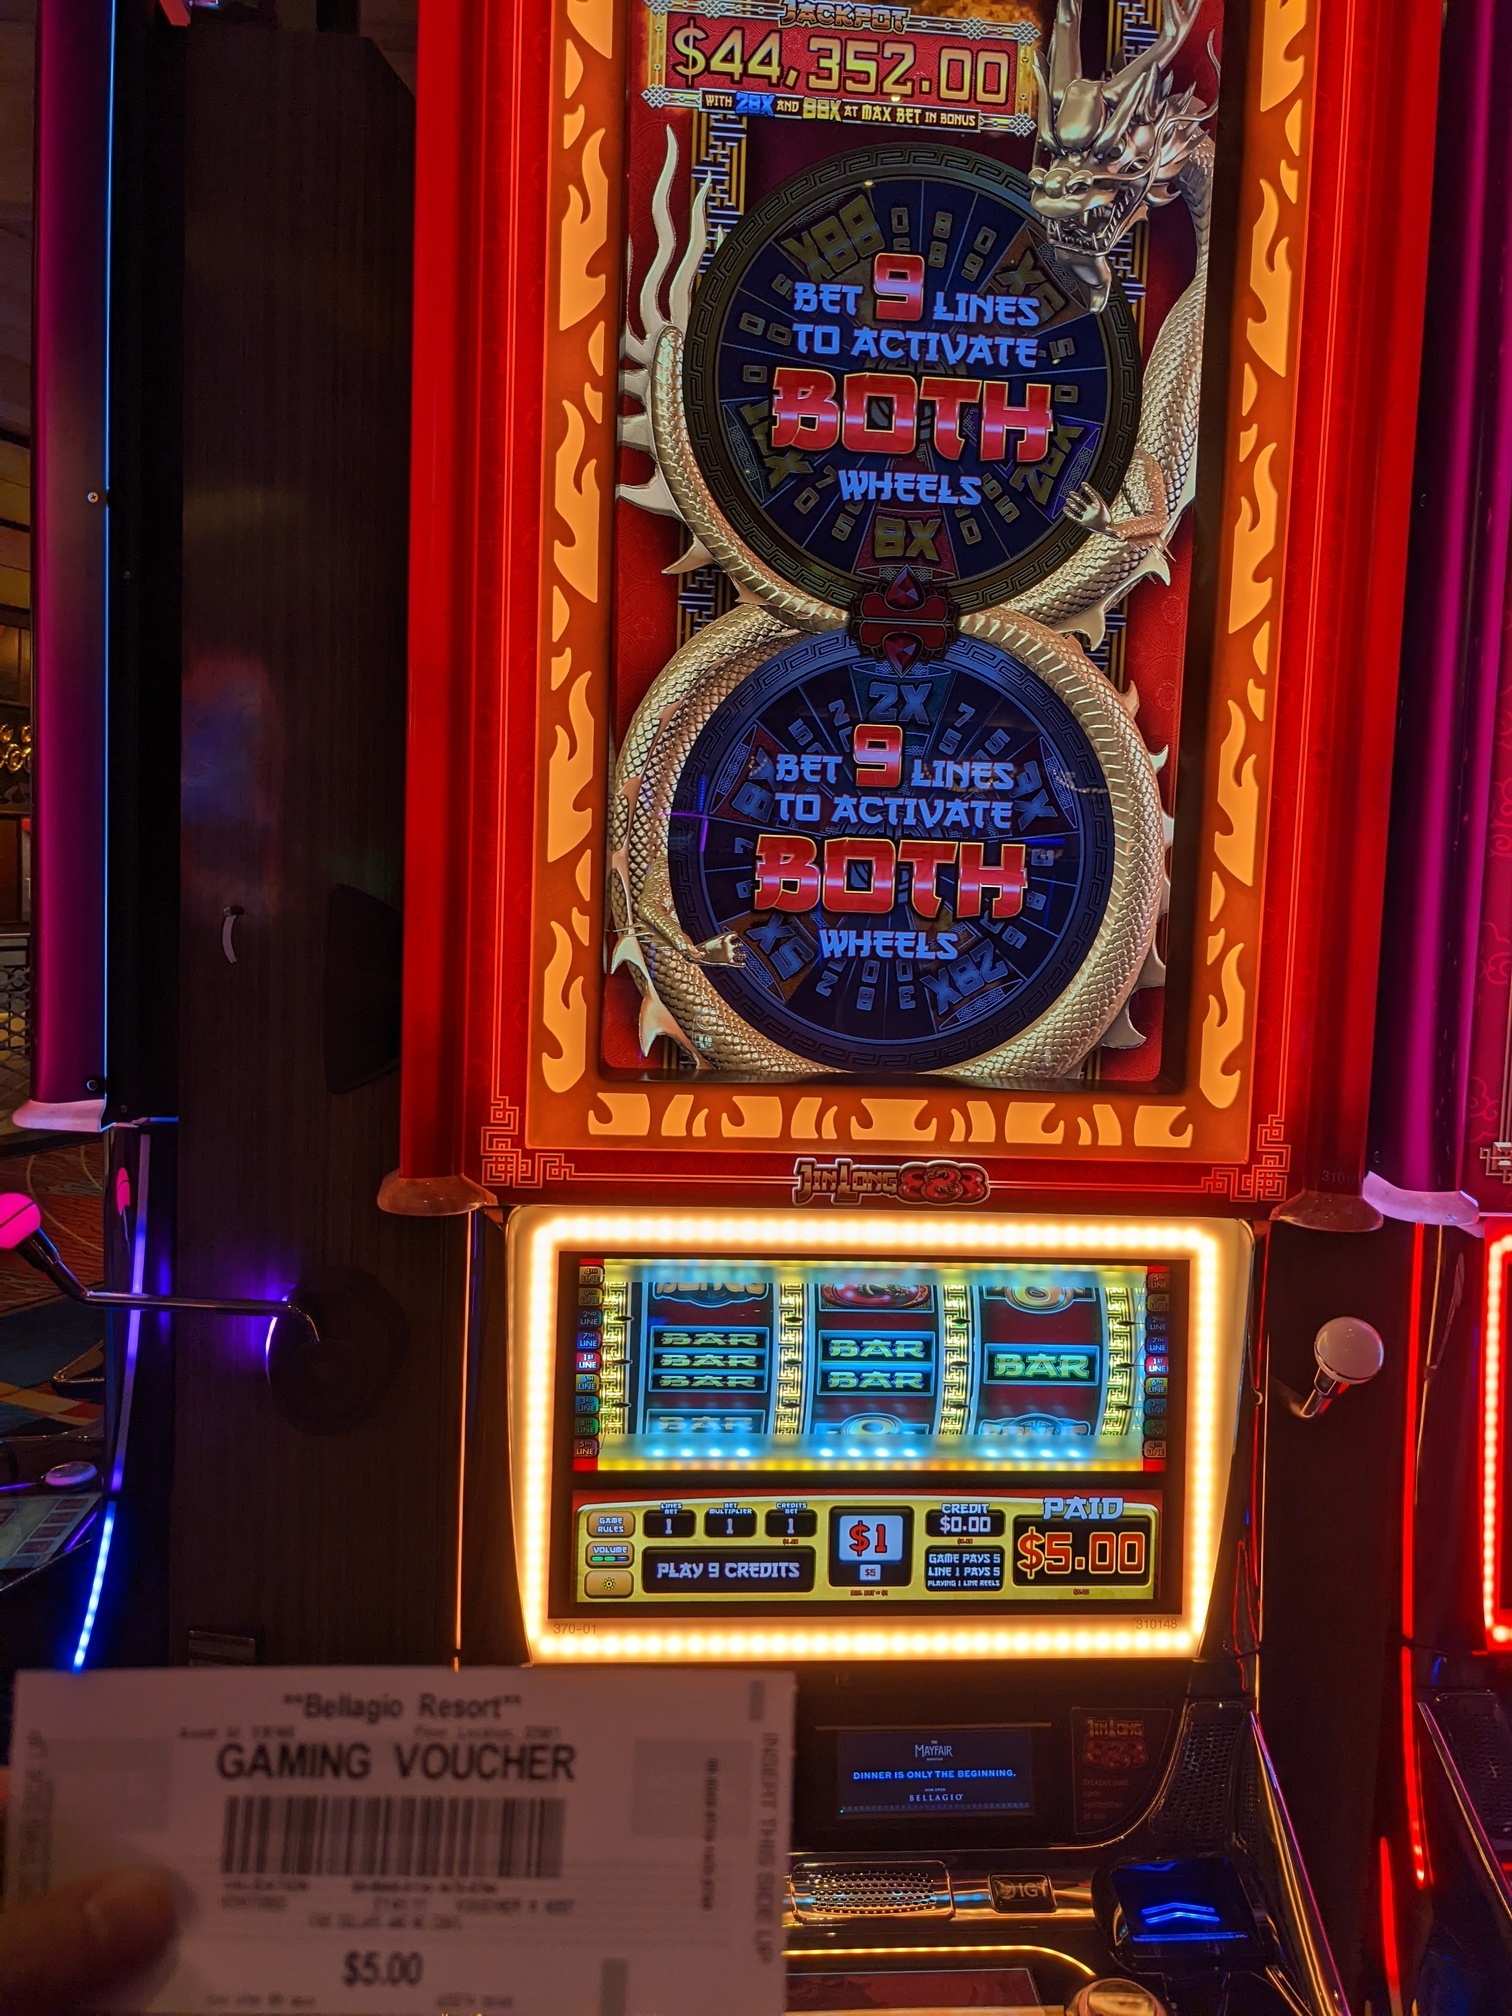 A $5.00 'gaming voucher' held in front of a slot machine with a golden dragon circling two wheels, which is indicating that it costs $1 to pay and just paid out $5.00